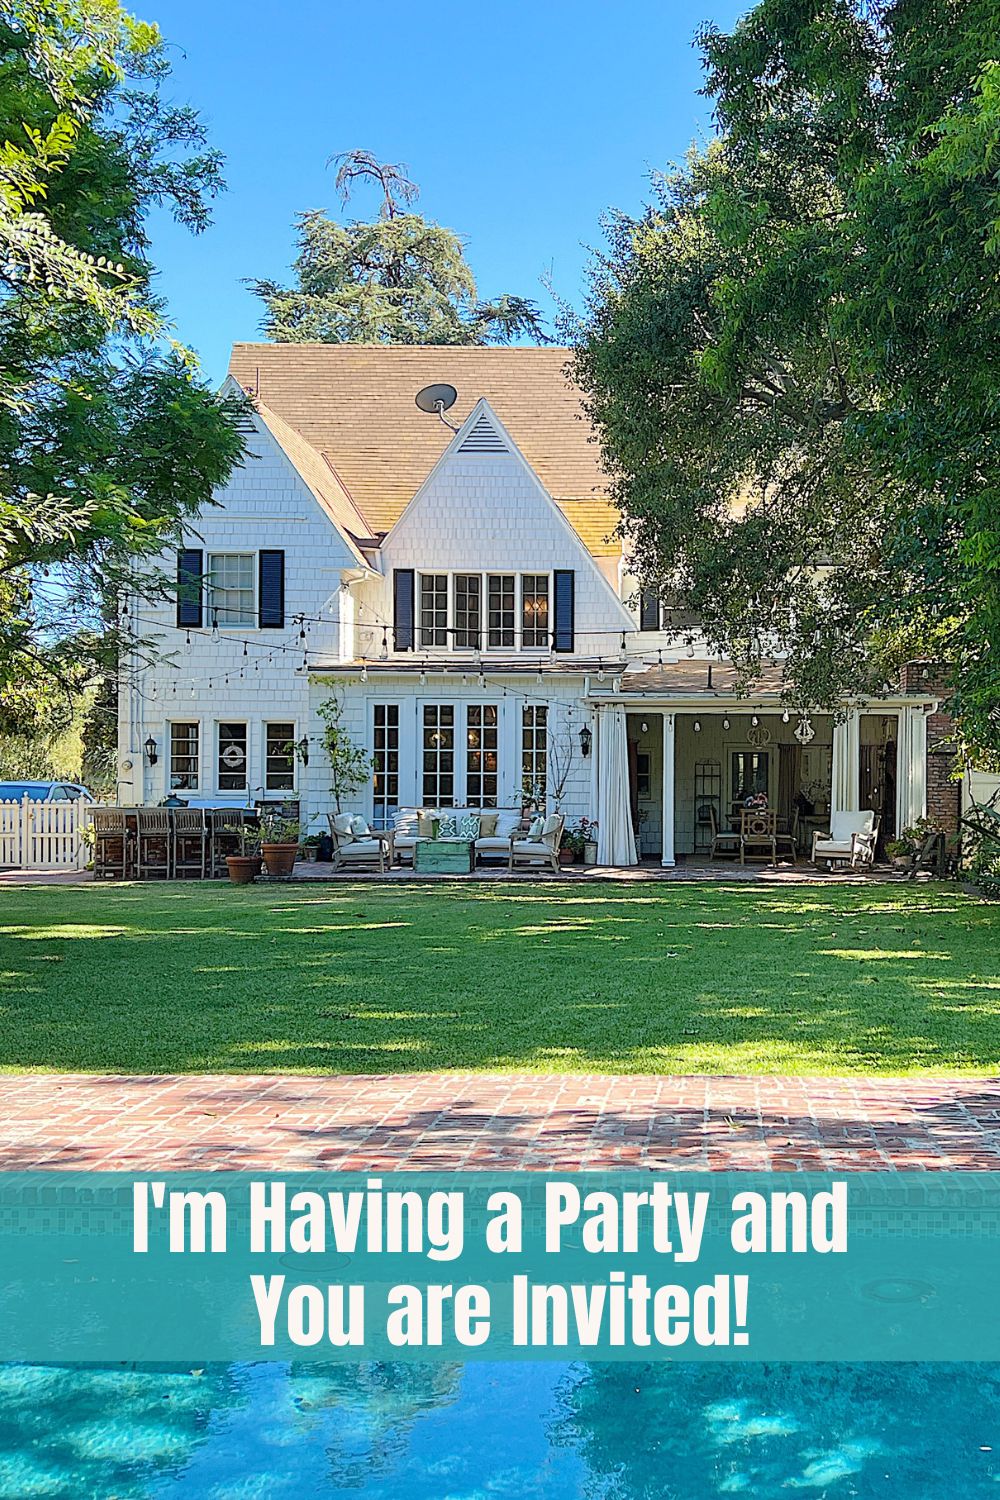 I'm so excited! I am having a party for my book launch and for the first time ever you are all invited to my home!